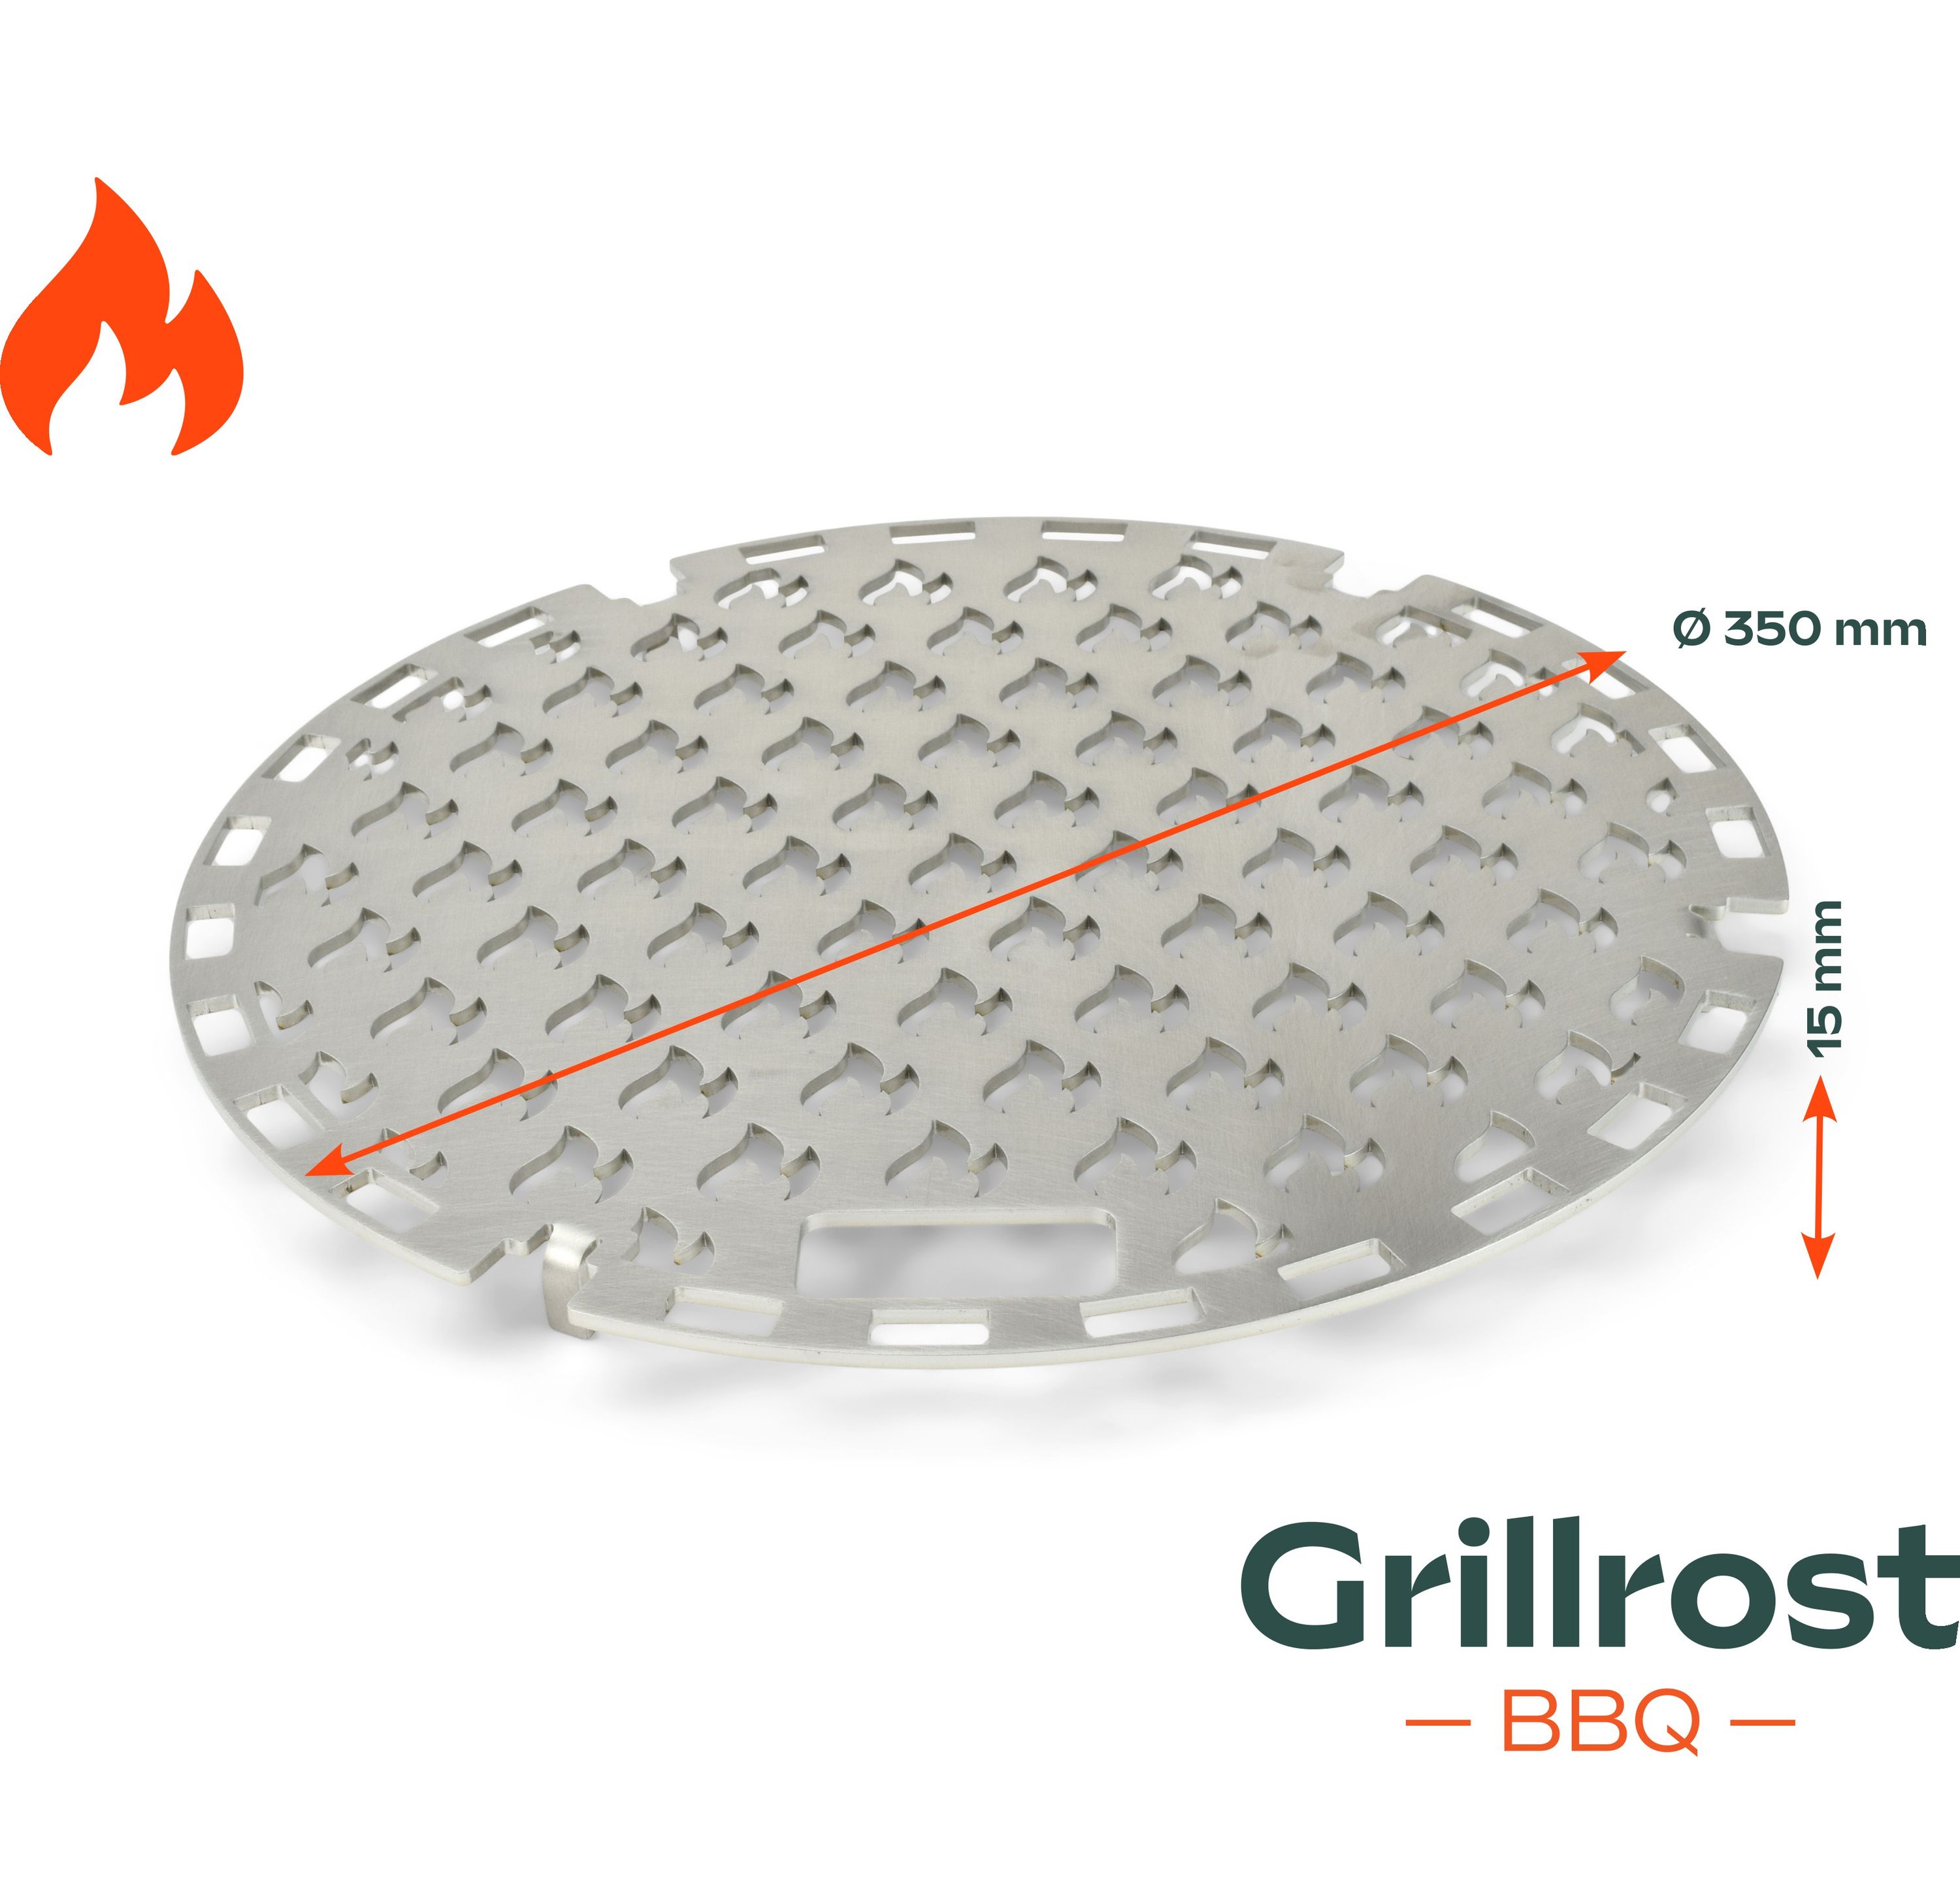 The fire plate grill Flame grill grate Direct flame branding